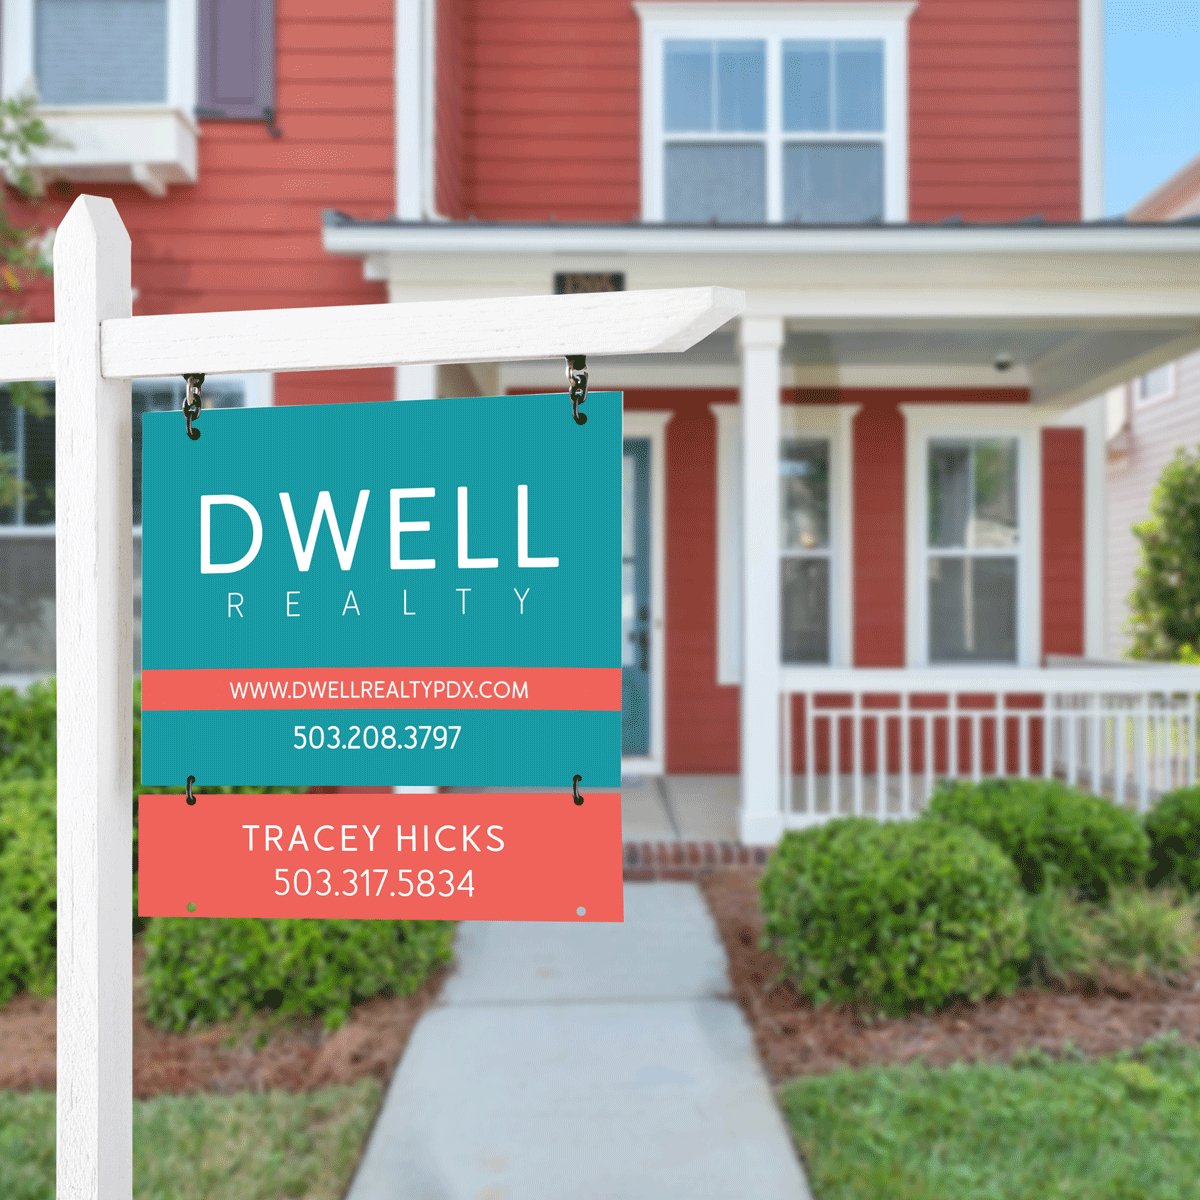 Personalized DWELL Real Estate Riders - All Things Real Estate